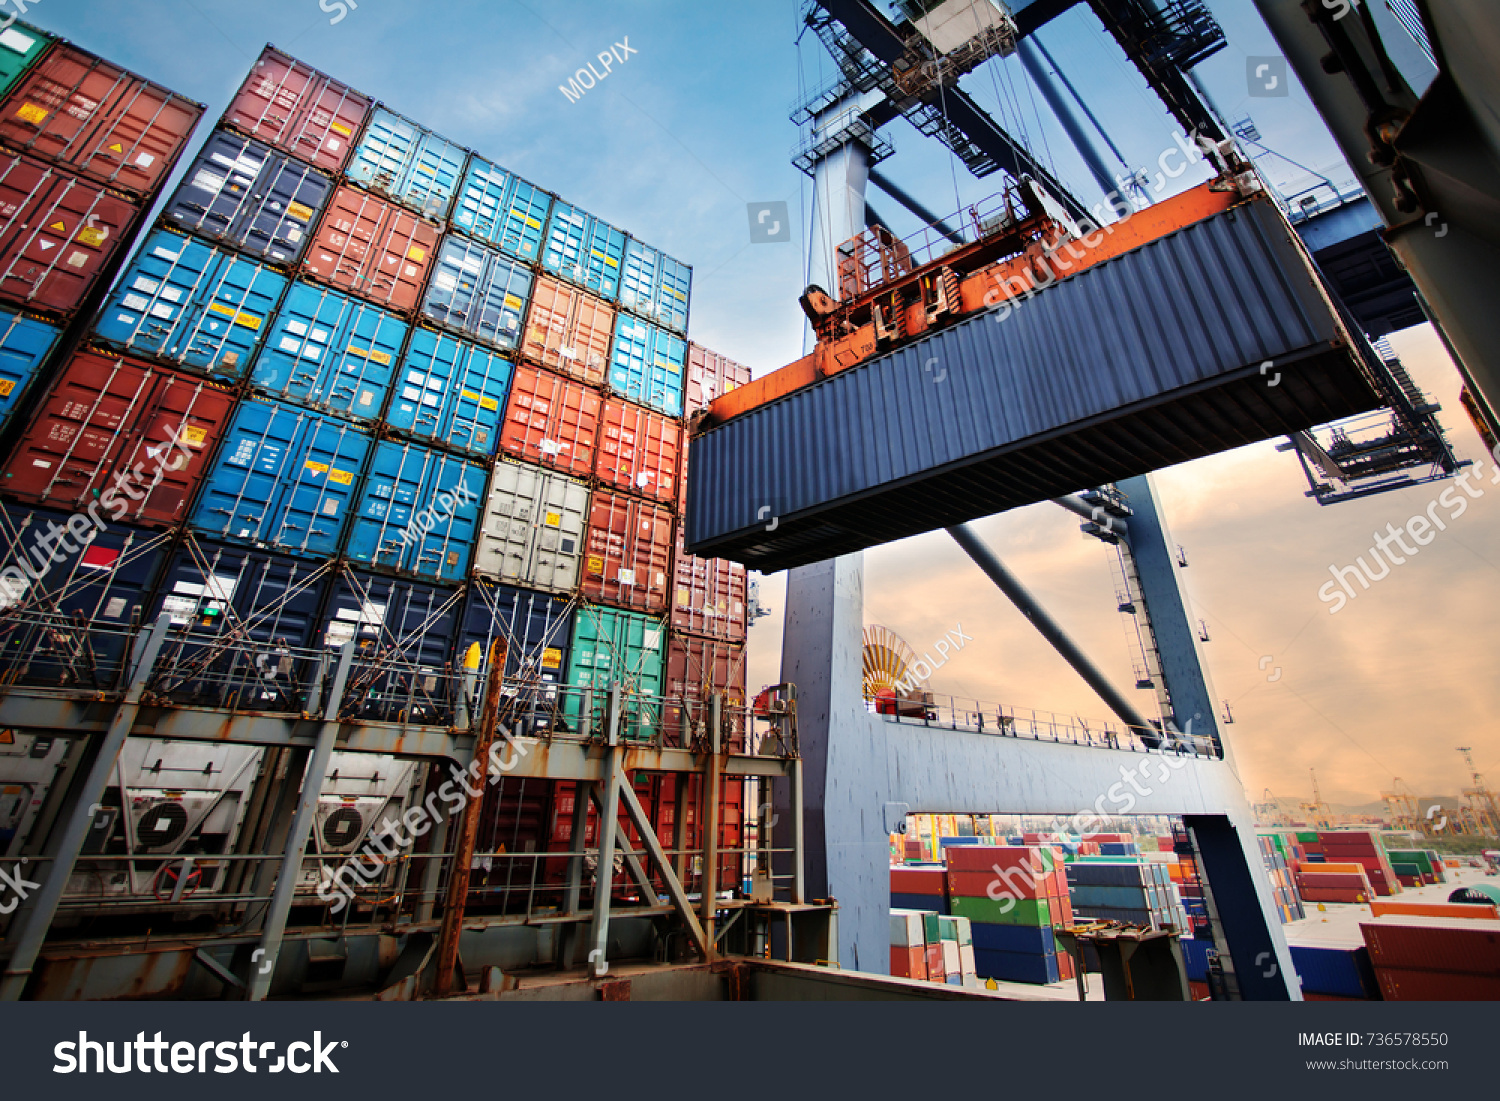 Container loading in a Cargo freight ship with industrial crane. Container ship in import and export business logistic company. Industry and Transportation concept. #736578550